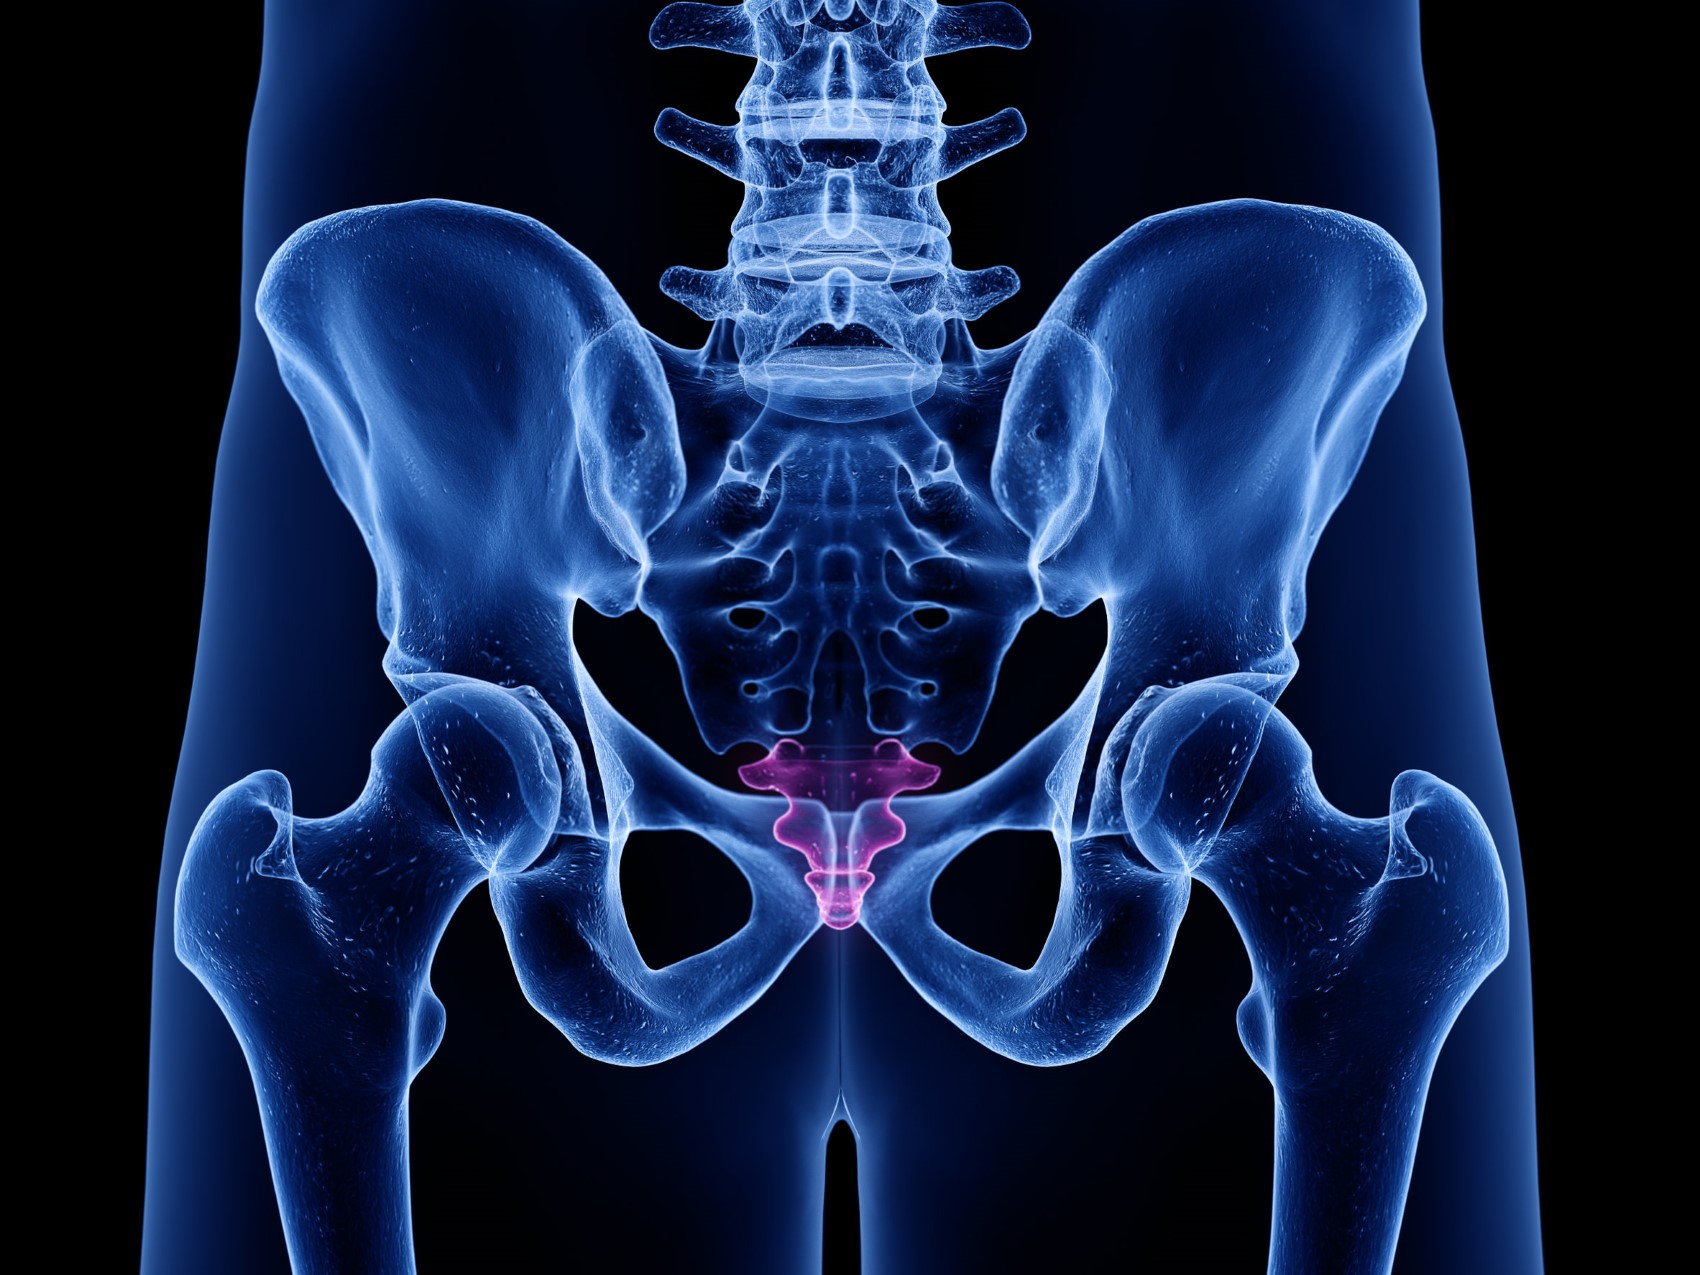 3d rendered medically accurate illustration of the coccyx - Coccydynia AKA Tailbone Pain